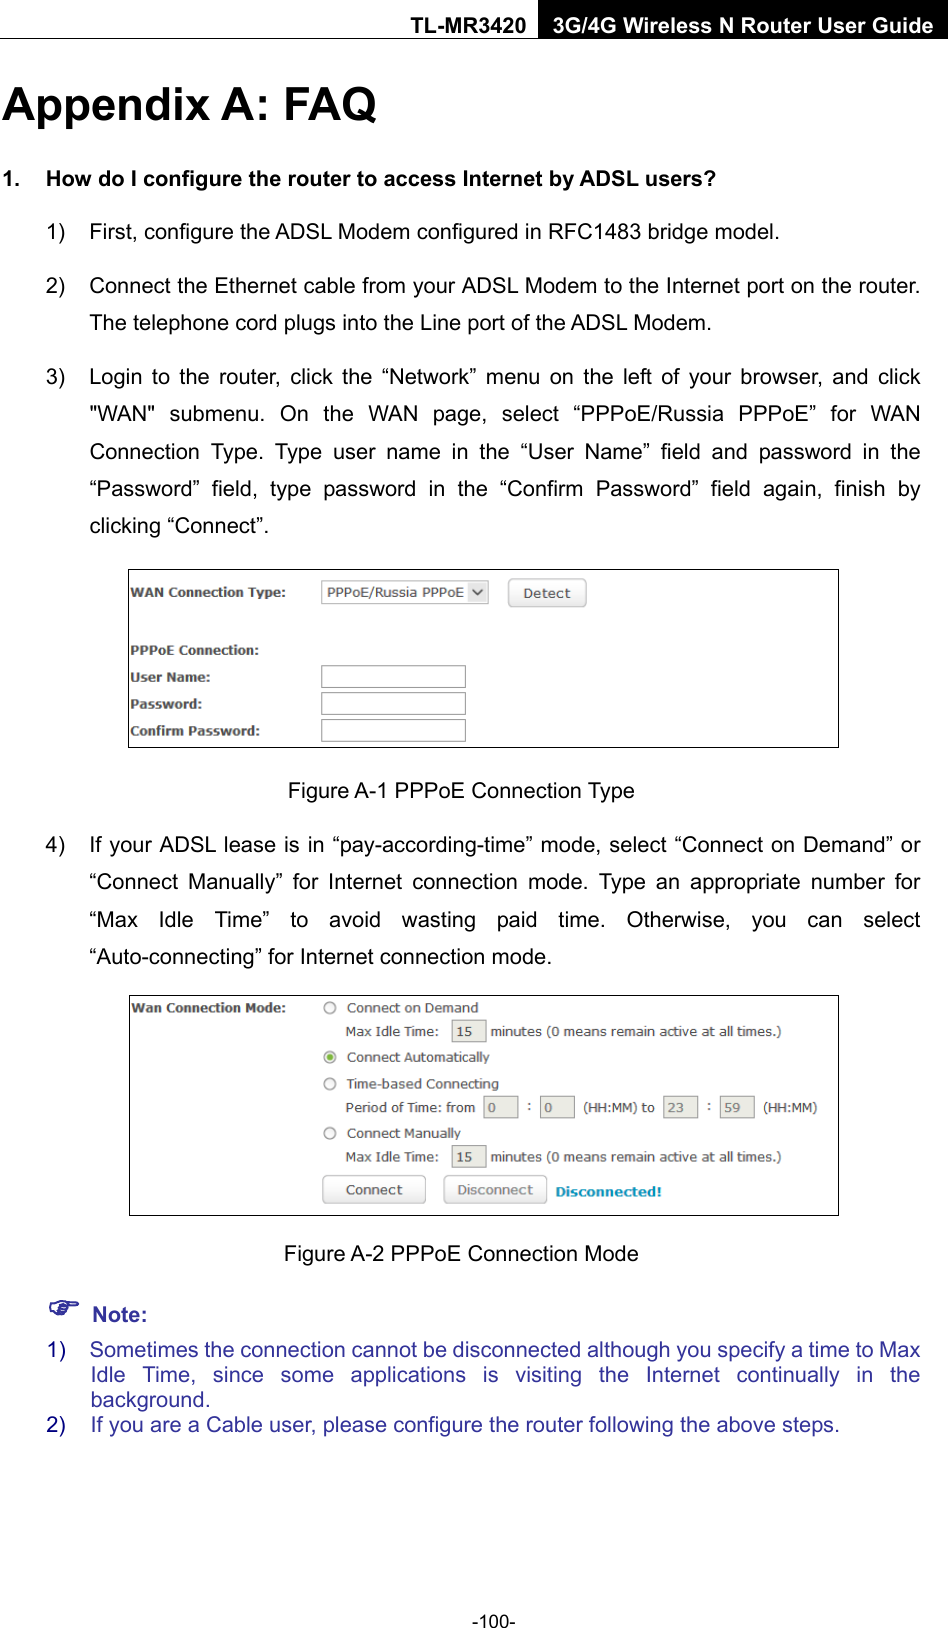    -100- TL-MR3420 3G/4G Wireless N Router User Guide Appendix A: FAQ 1. How do I configure the router to access Internet by ADSL users? 1)  First, configure the ADSL Modem configured in RFC1483 bridge model. 2) Connect the Ethernet cable from your ADSL Modem to the Internet port on the router. The telephone cord plugs into the Line port of the ADSL Modem. 3) Login to the router, click the “Network” menu on the left of your browser, and click &quot;WAN&quot; submenu. On the WAN page, select “PPPoE/Russia PPPoE” for WAN Connection Type. Type user name in the “User Name” field and password in the “Password” field, type password in the “Confirm Password” field again, finish by clicking “Connect”.  Figure A-1 PPPoE Connection Type 4) If your ADSL lease is in “pay-according-time” mode, select “Connect on Demand” or “Connect Manually” for Internet connection mode. Type an appropriate number for “Max Idle Time” to avoid wasting paid time. Otherwise, you can select “Auto-connecting” for Internet connection mode.  Figure A-2 PPPoE Connection Mode  Note: 1) Sometimes the connection cannot be disconnected although you specify a time to Max Idle Time, since some applications is visiting the Internet continually in the background. 2) If you are a Cable user, please configure the router following the above steps. 